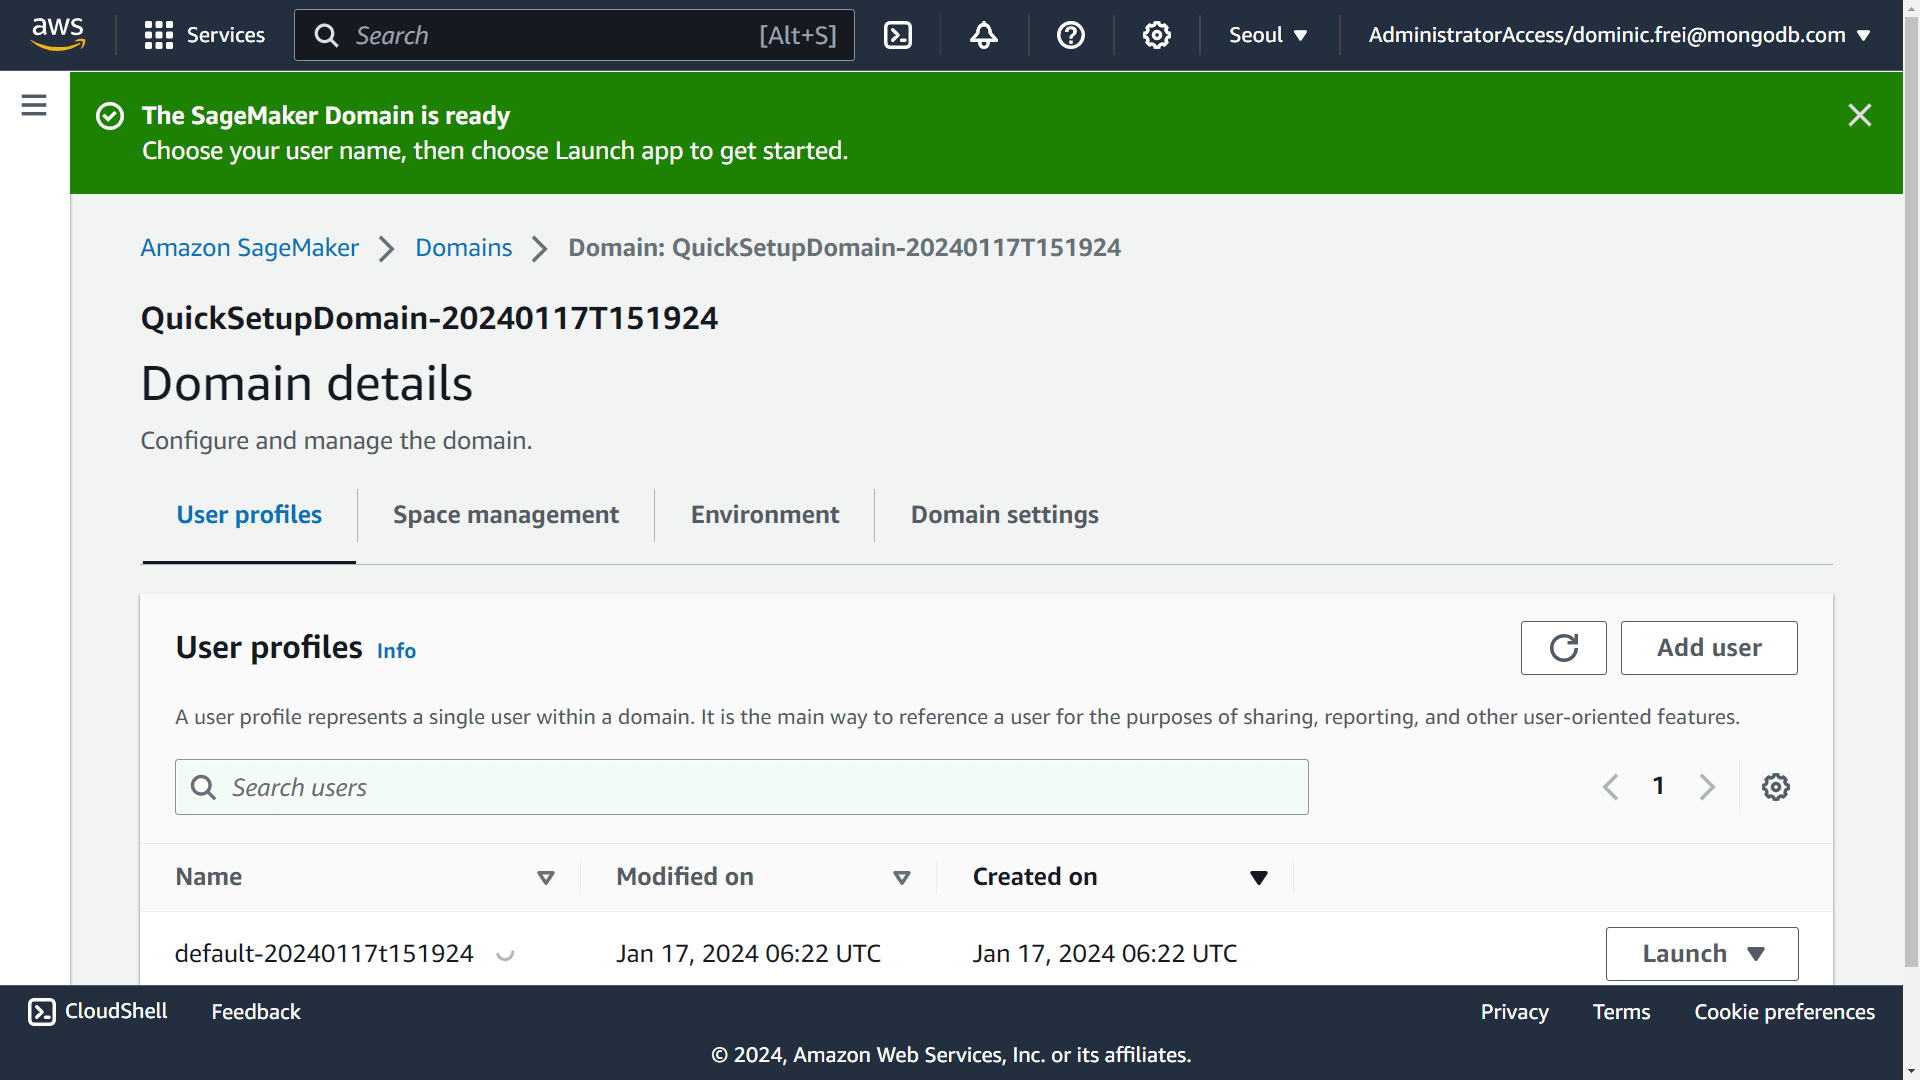 Domain details in SageMaker after being created